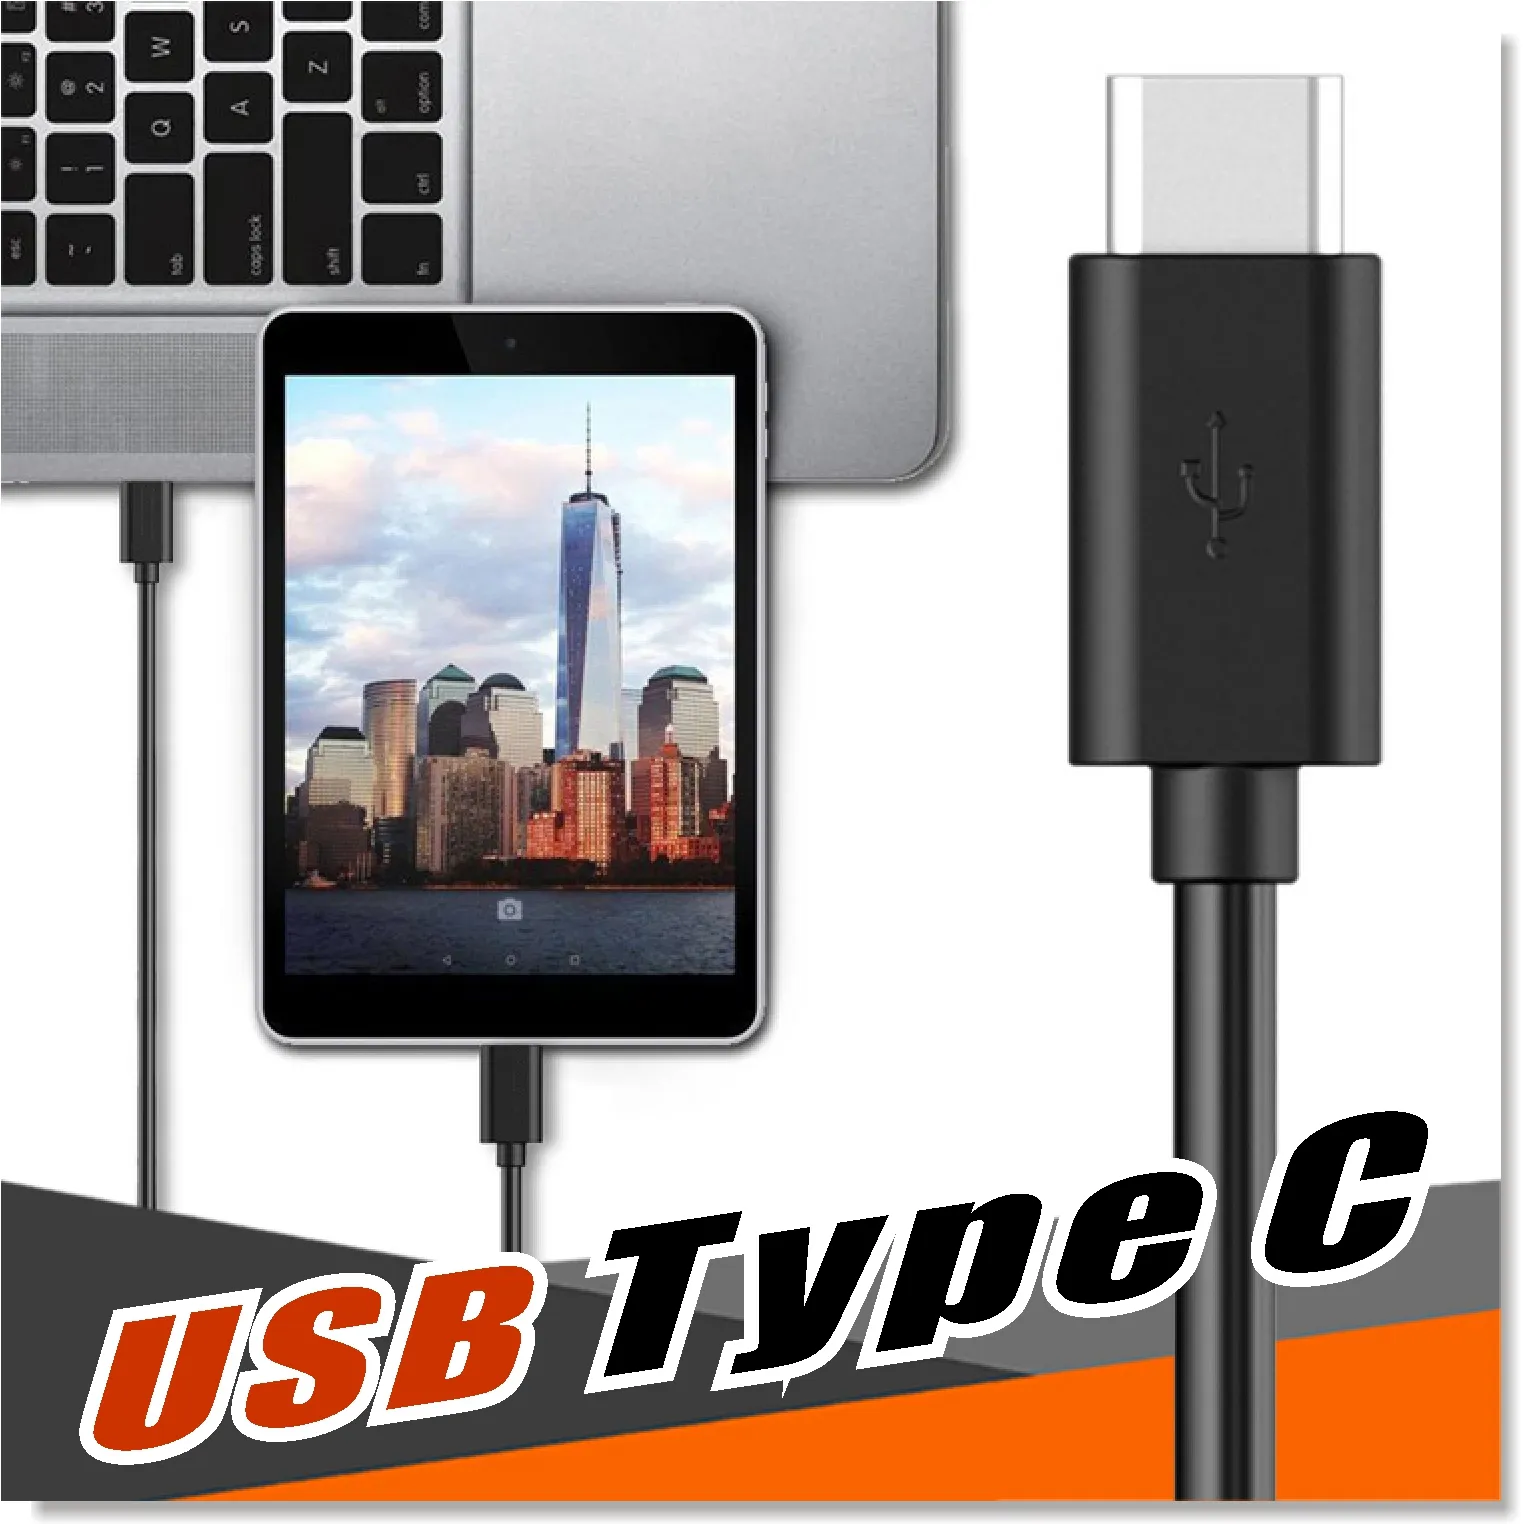 USB Type C Cable USB Charger 3.1 to USB 2.0 A Male Data Charging Cable for Nexus 5X Nexus 6P Pixel C Samsung